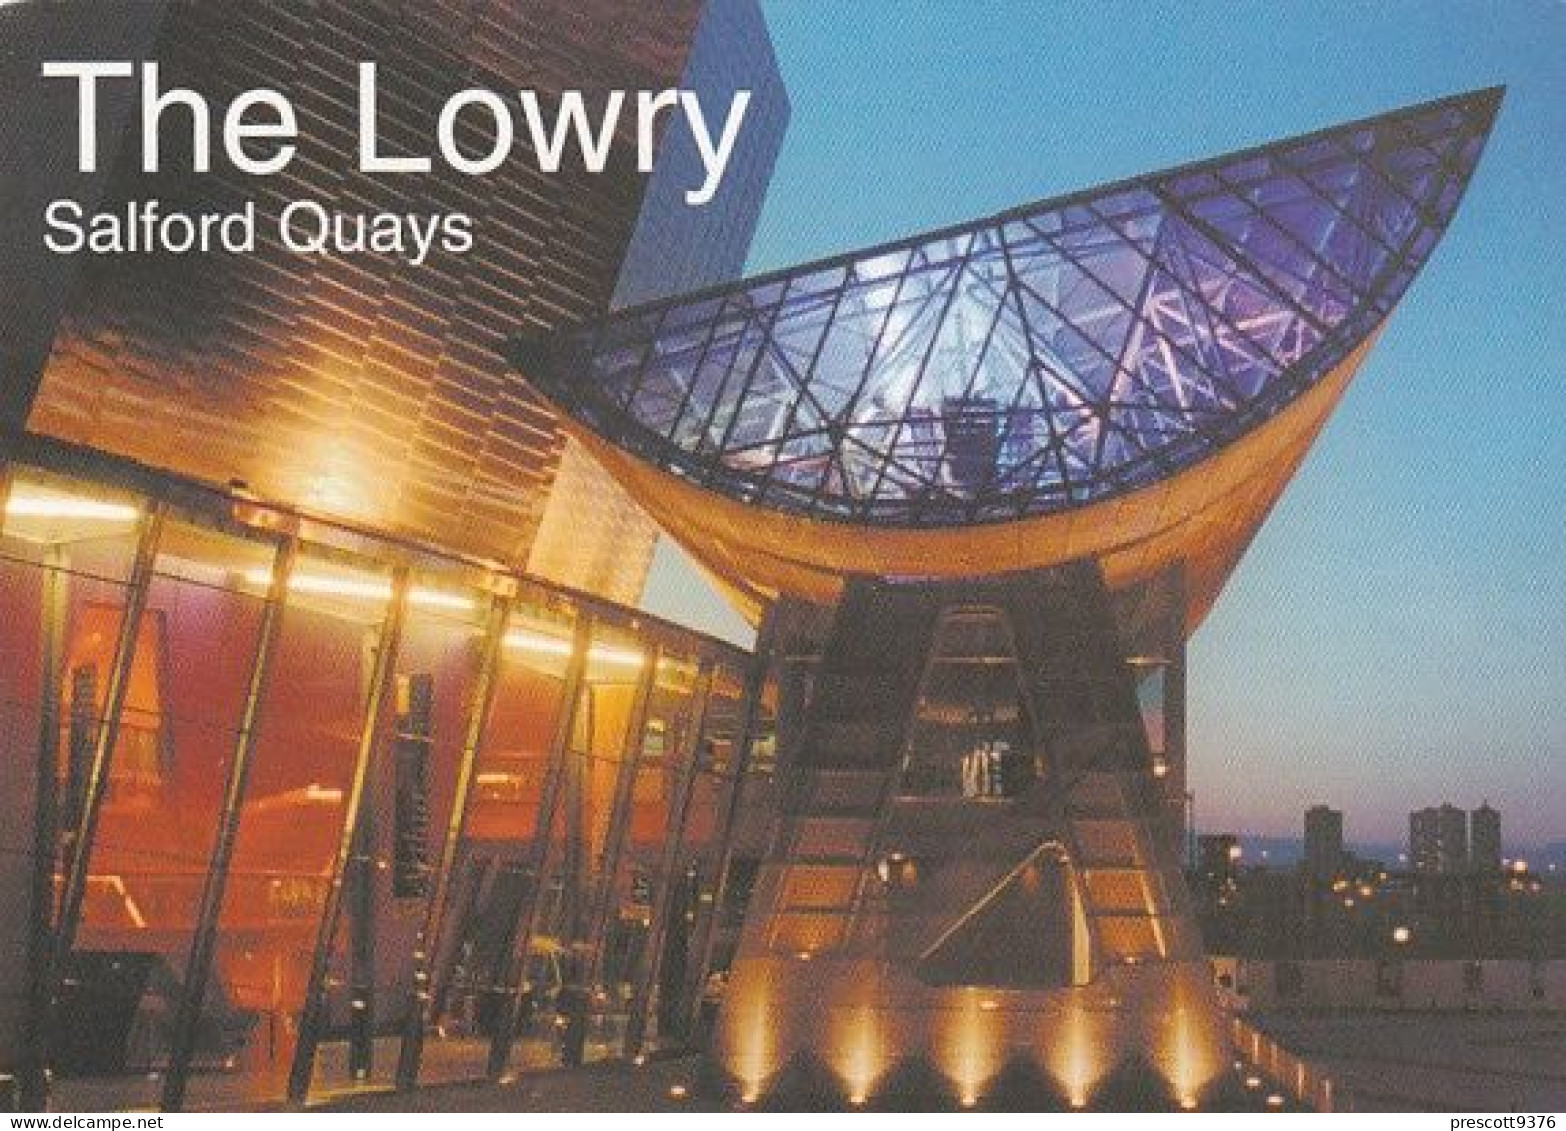 The Lowry, Salford Quays, Manchester - Lancashire - Unused Postcard - Lan3 - Manchester